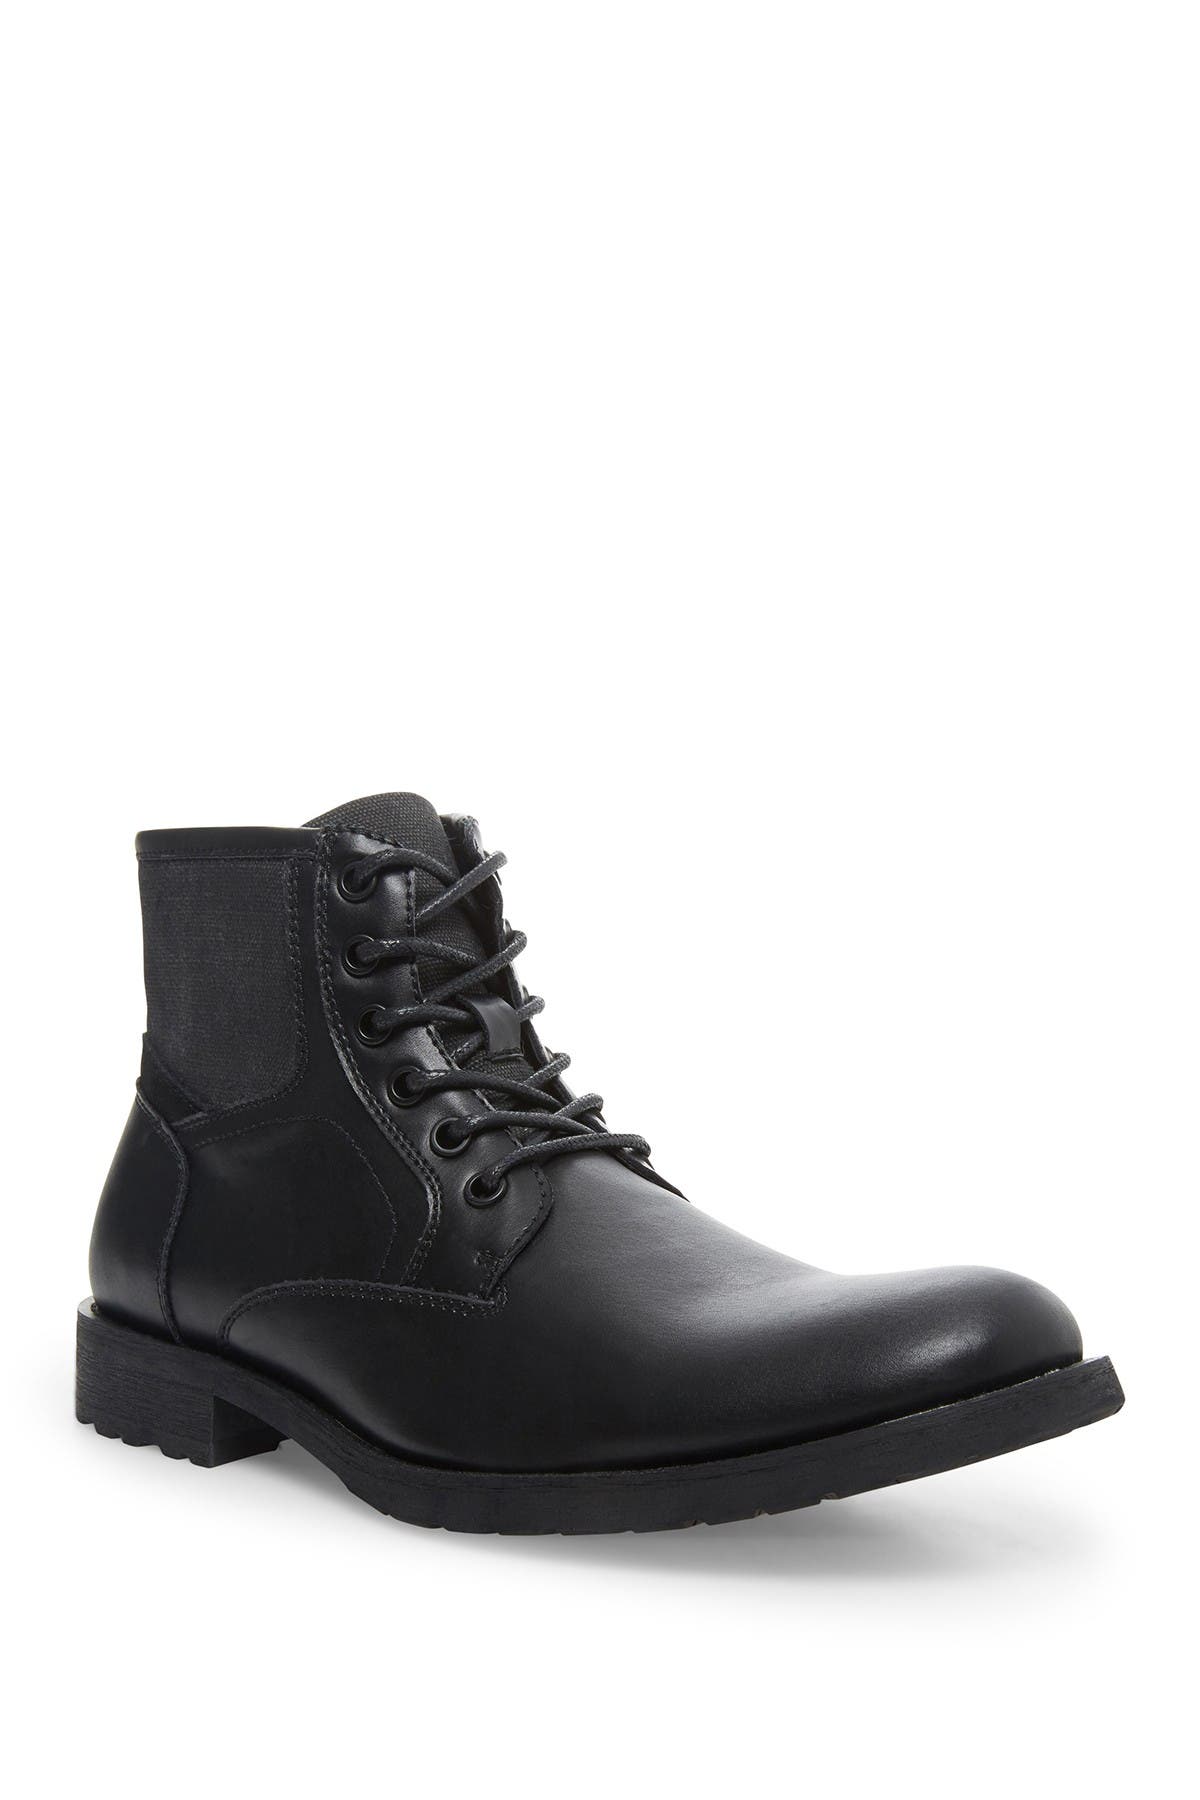 lace up steve madden boots